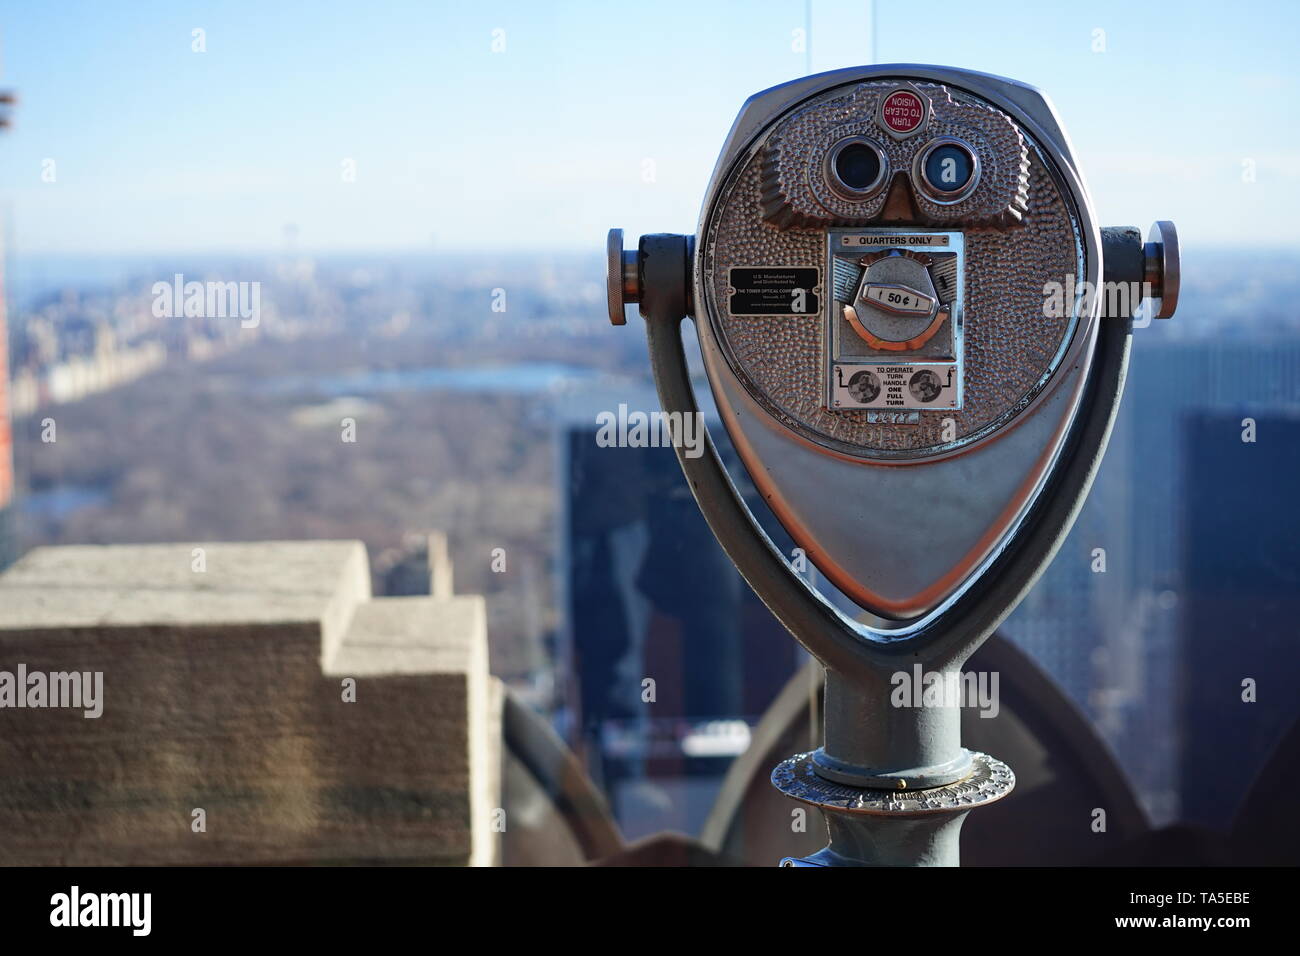 Coin operated binoculars on the observation deck of a building in New York City Stock Photo